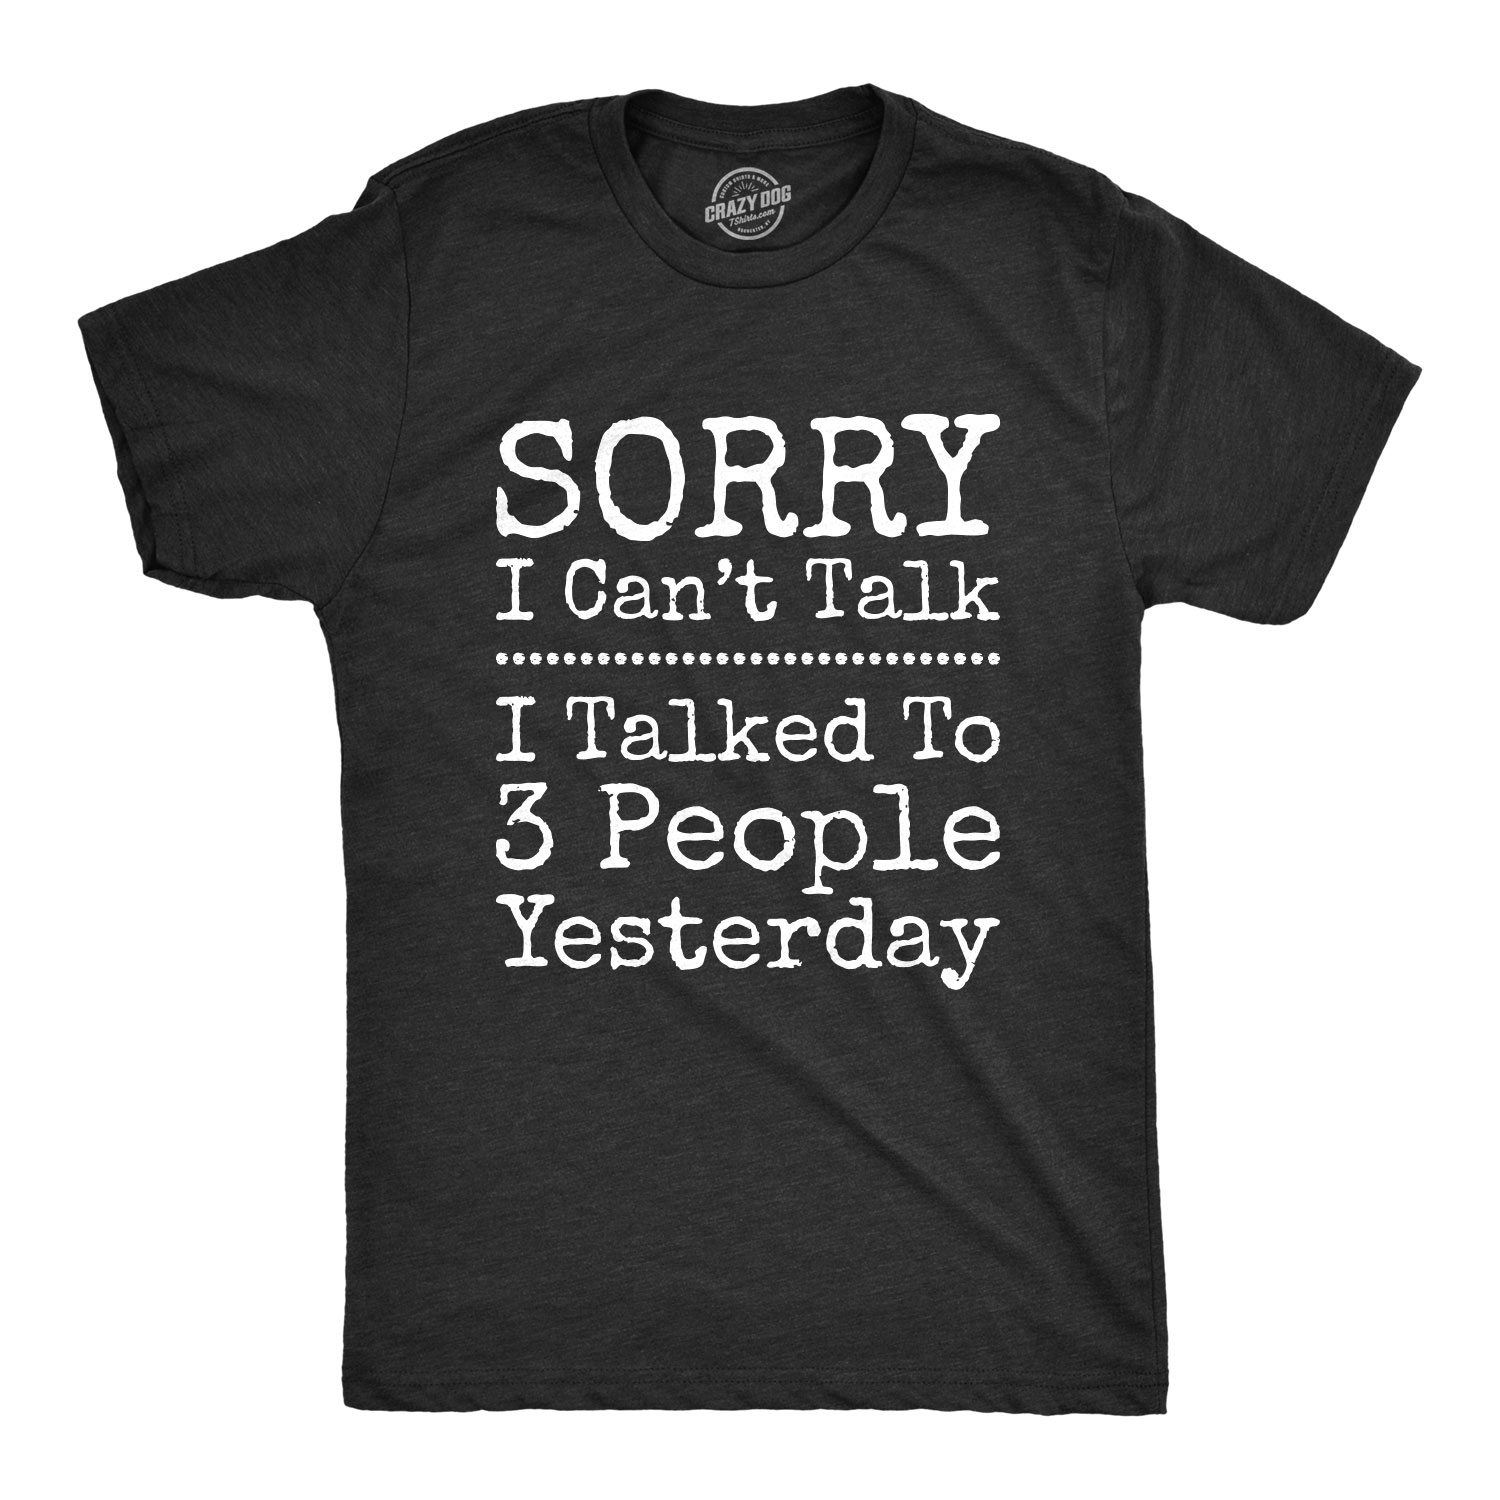 Crazy Dog Tshirts Mens Sorry I Can't Talk I Talked To 3 People Yesterday Tshirt Funny Sarcasm Tee